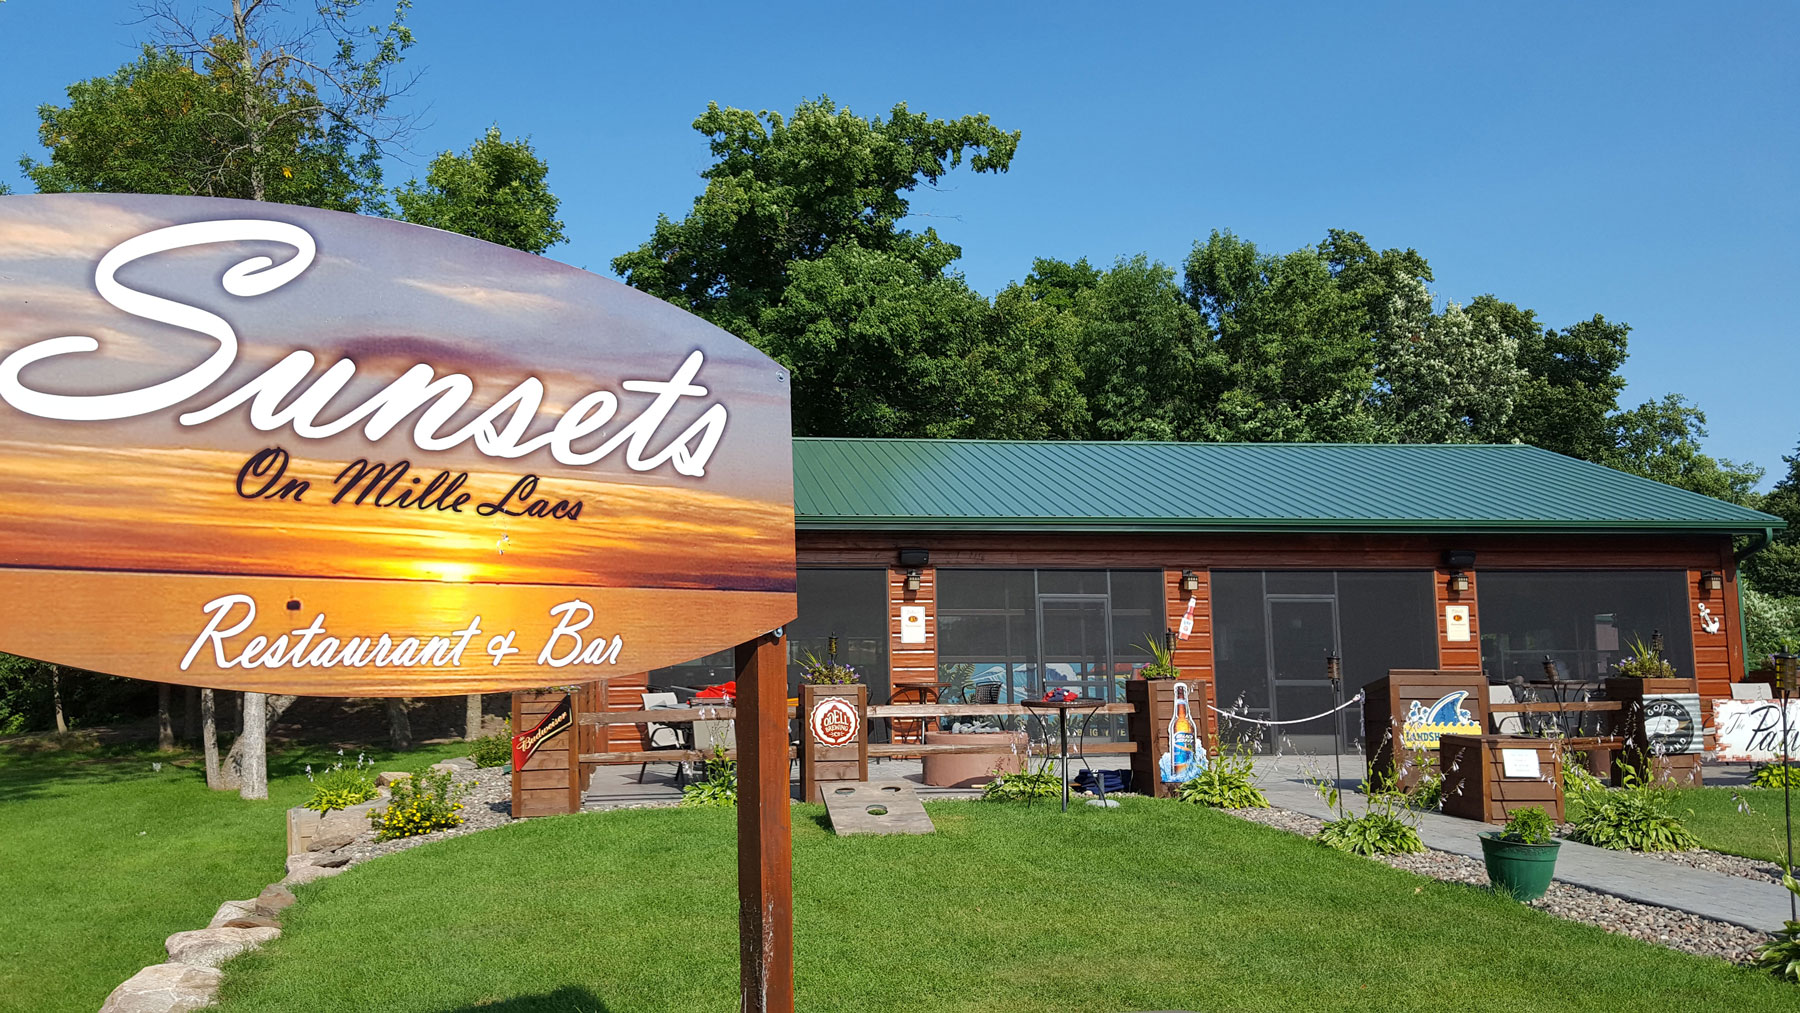 Sunsets on Mille Lacs Restaurant and Bar